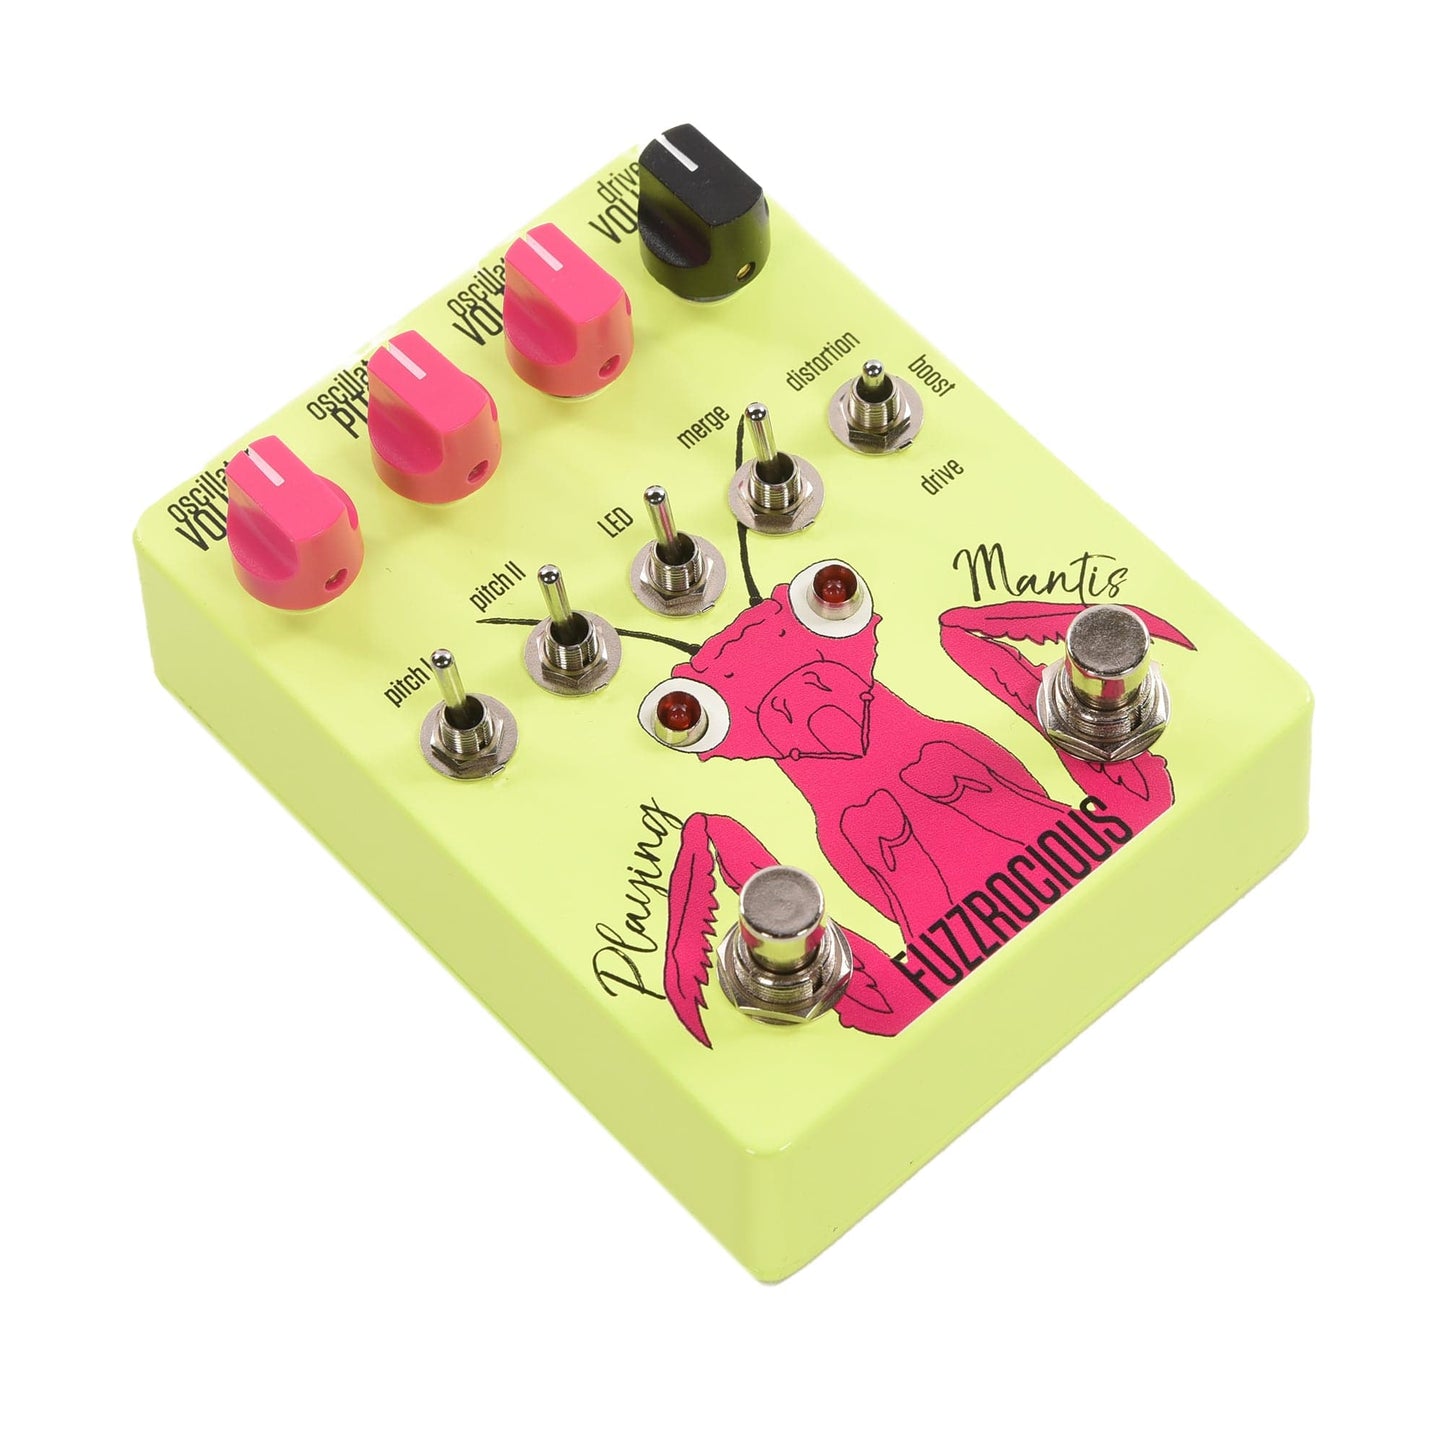 Fuzzrocious Playing Mantis Neon Yellow Effects and Pedals / Distortion